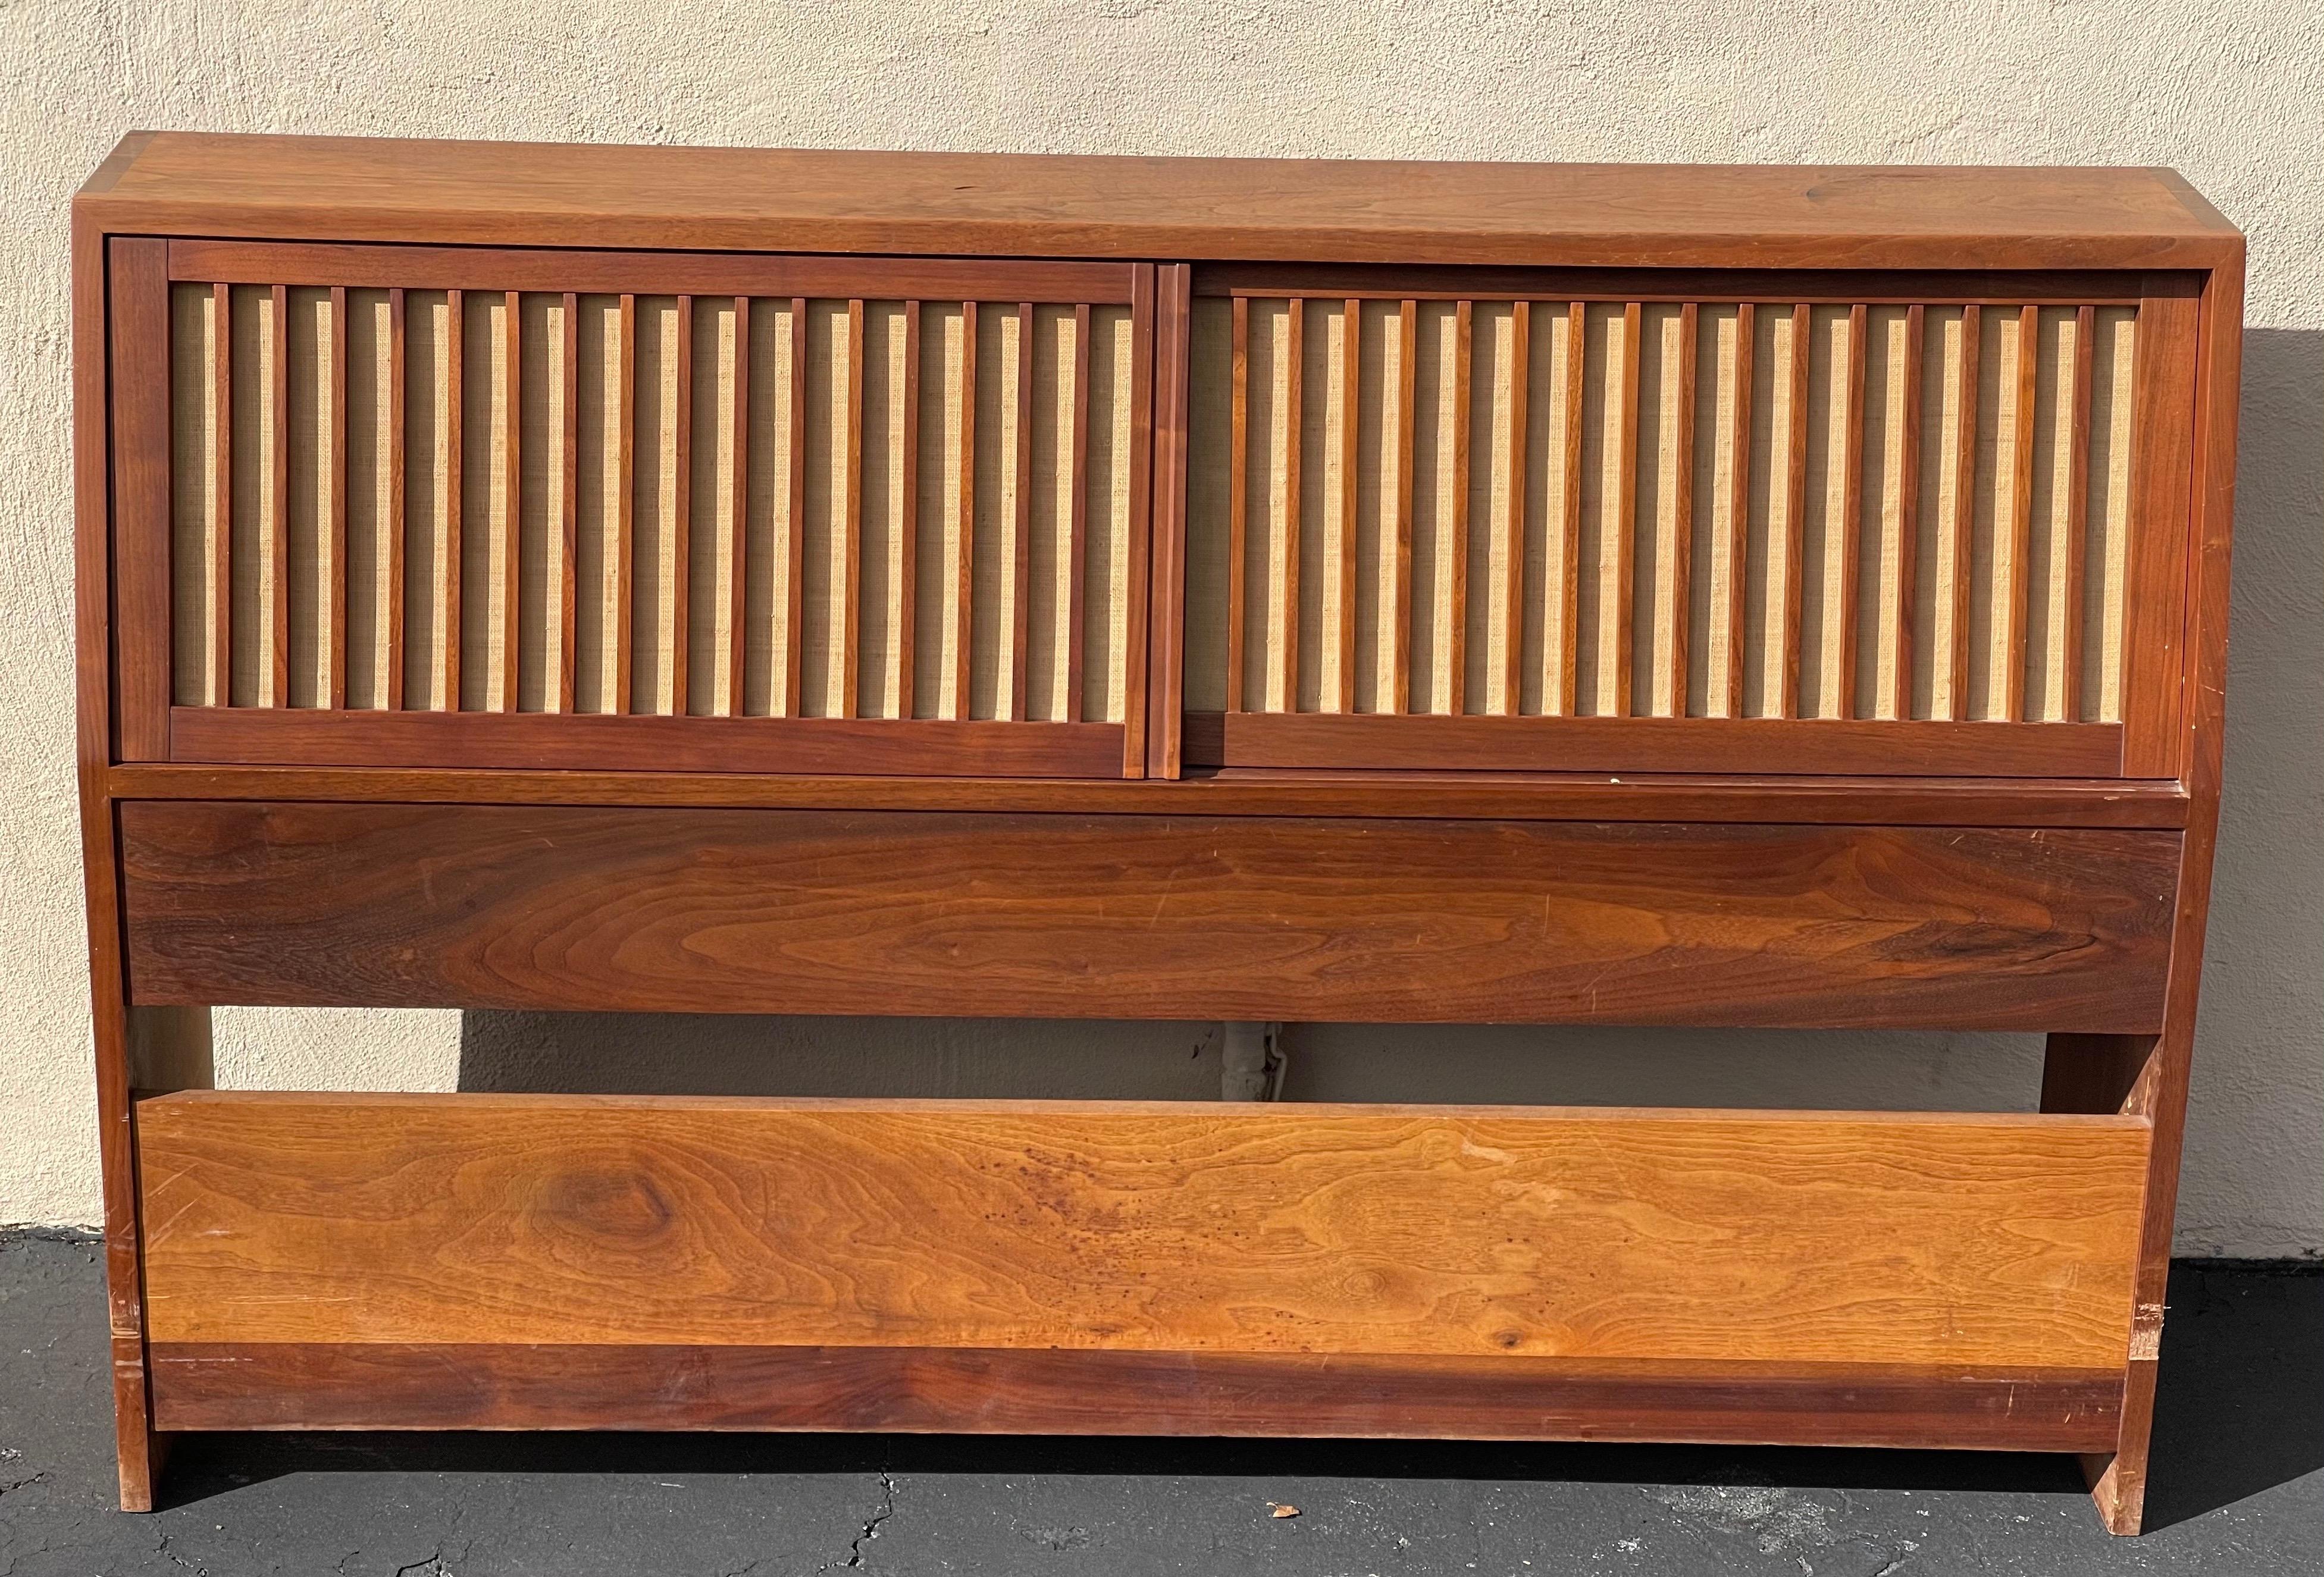 Striking Handcrafted Storage Headboard by George Nakashima with Paperwork, 1959 For Sale 7